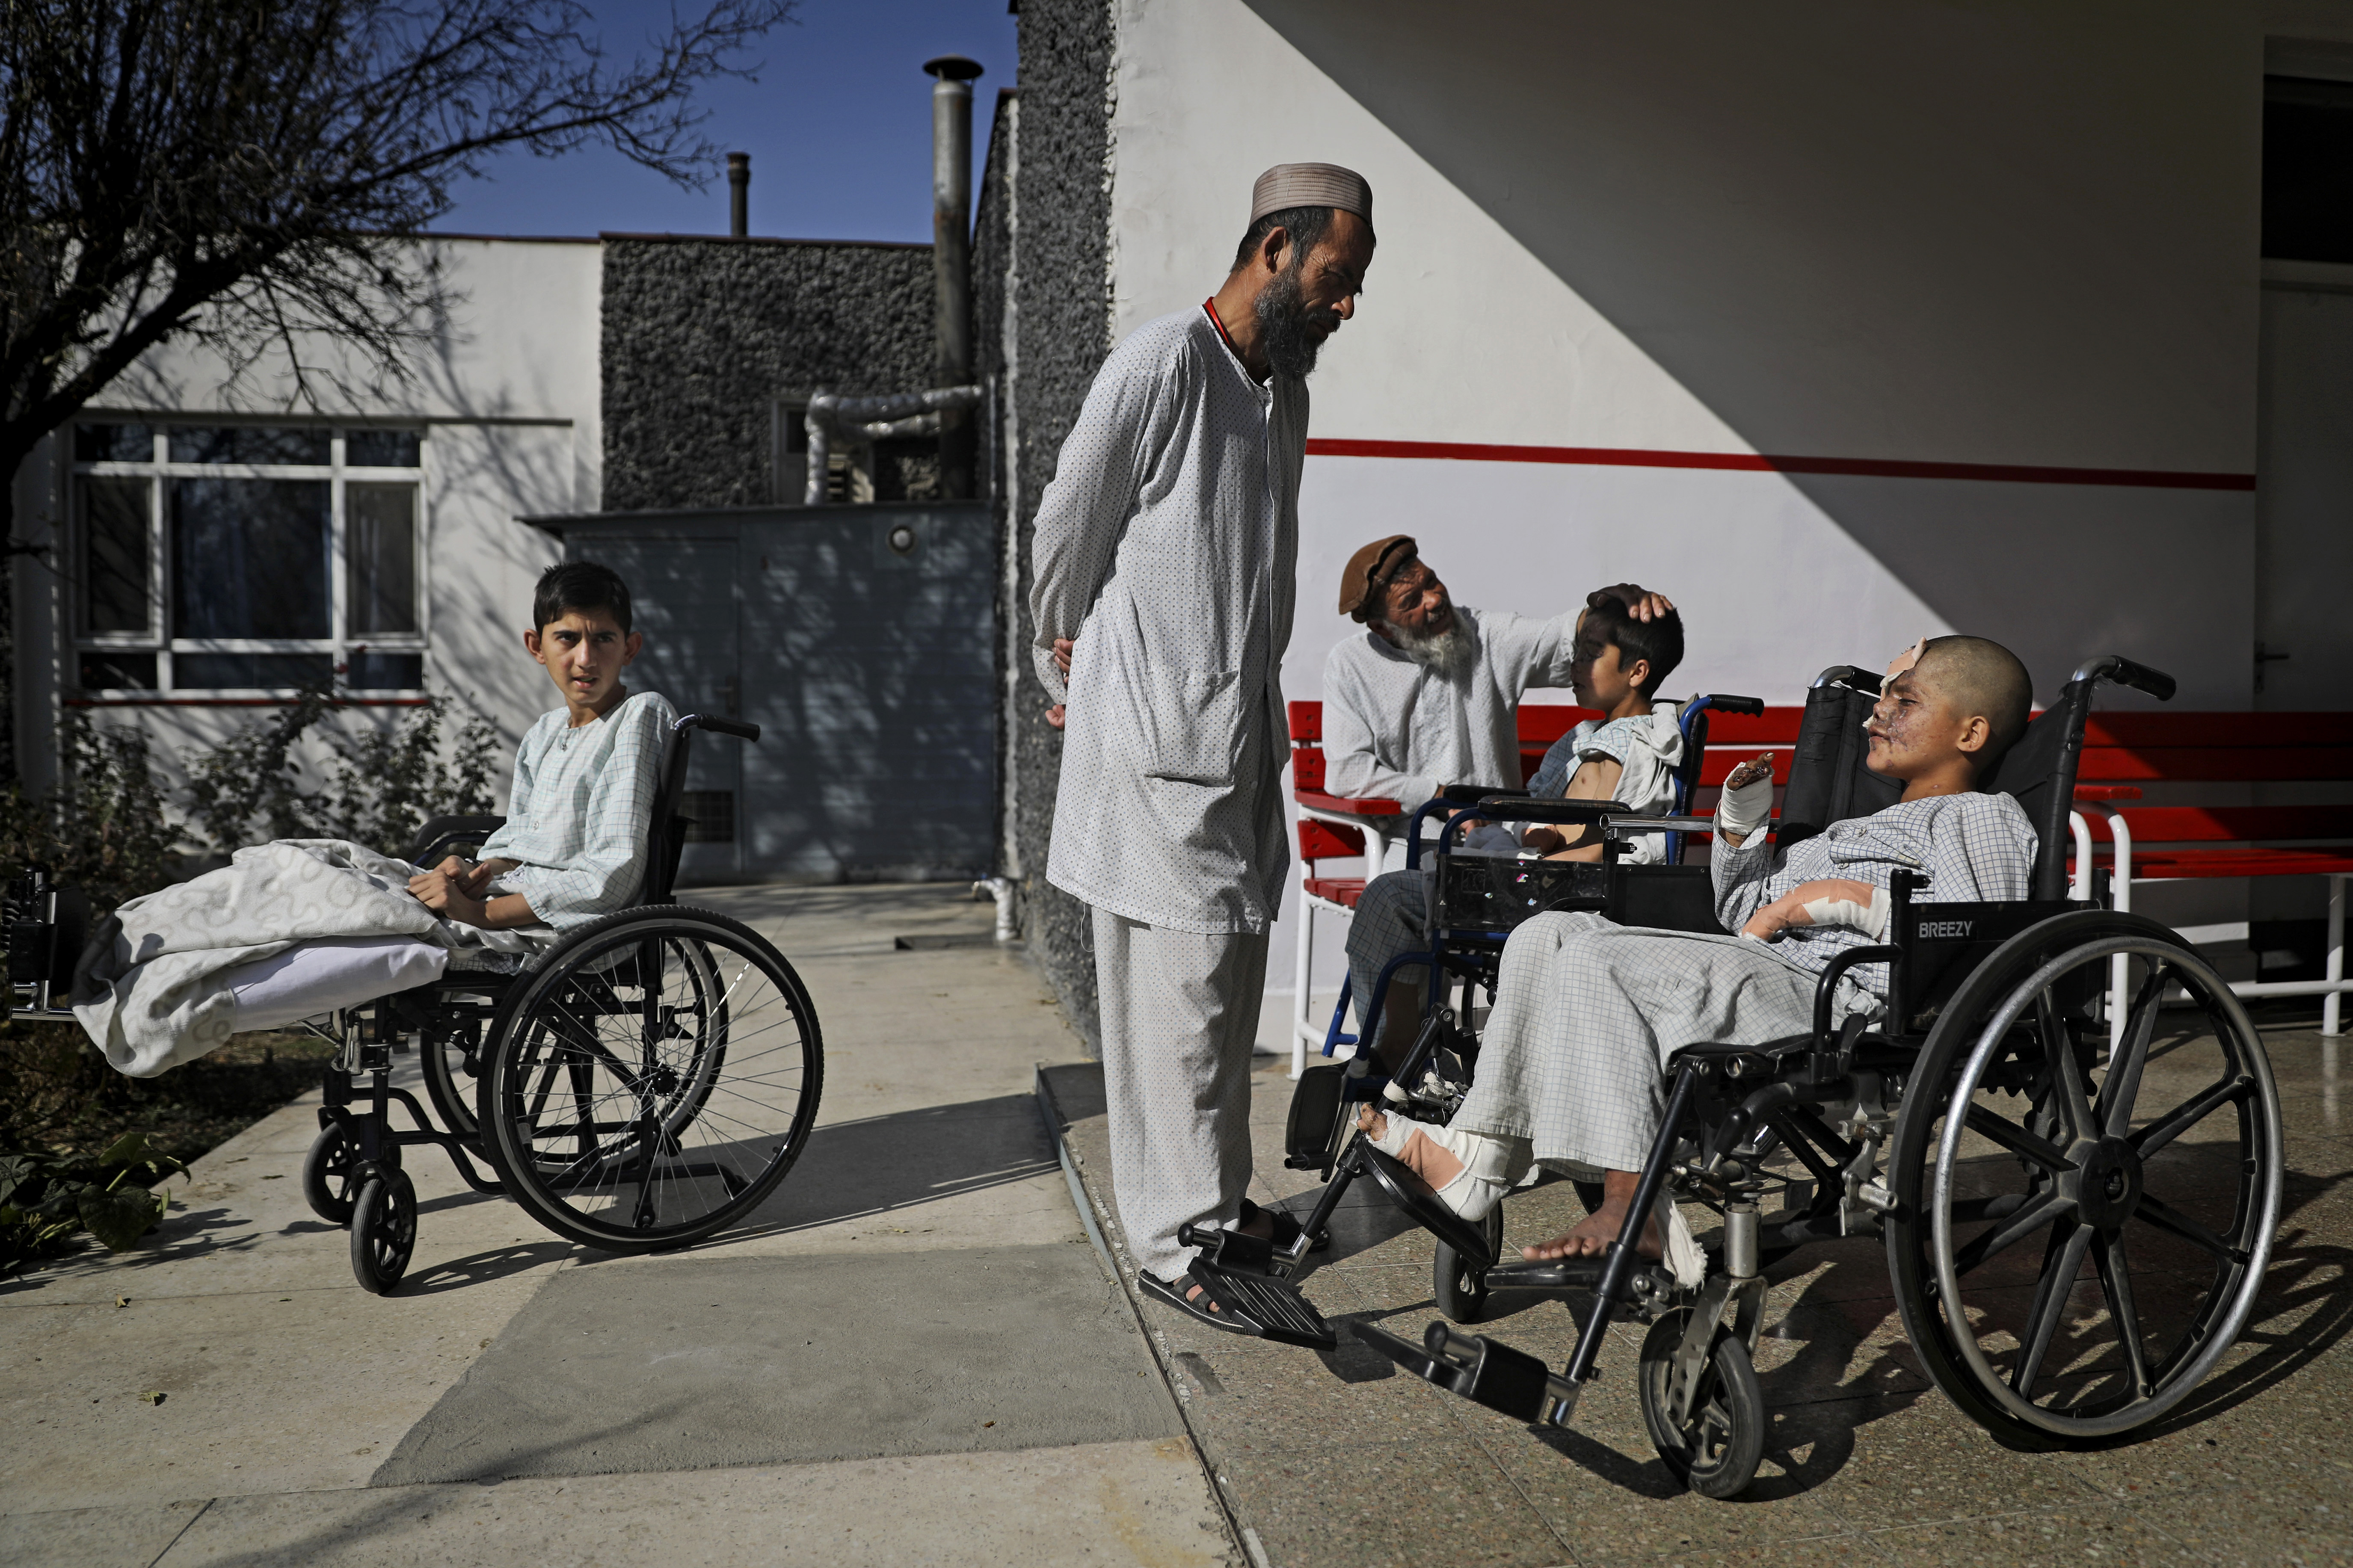 In this Thursday, Dec. 5, 2019, photo, young Afghan victims of war, Masiullah, left, who lost both his legs in a U.S. airstrike, nine-year-old Eimal, right, who has lost his right eye and several fingers on his hands in a landmine blast, and Ten-year-old Nessar Ahmad, second right, bask in sun outside their ward at Emergency Surgical Center for Civilian War Victims in Kabul, Afghanistan. The total number of children killed or maimed in more than four decades long Afghan war is not known. But, with a population where close to 50% are under the age of 20, the losses among the young is tremendous. (AP Photo/Altaf Qadri)